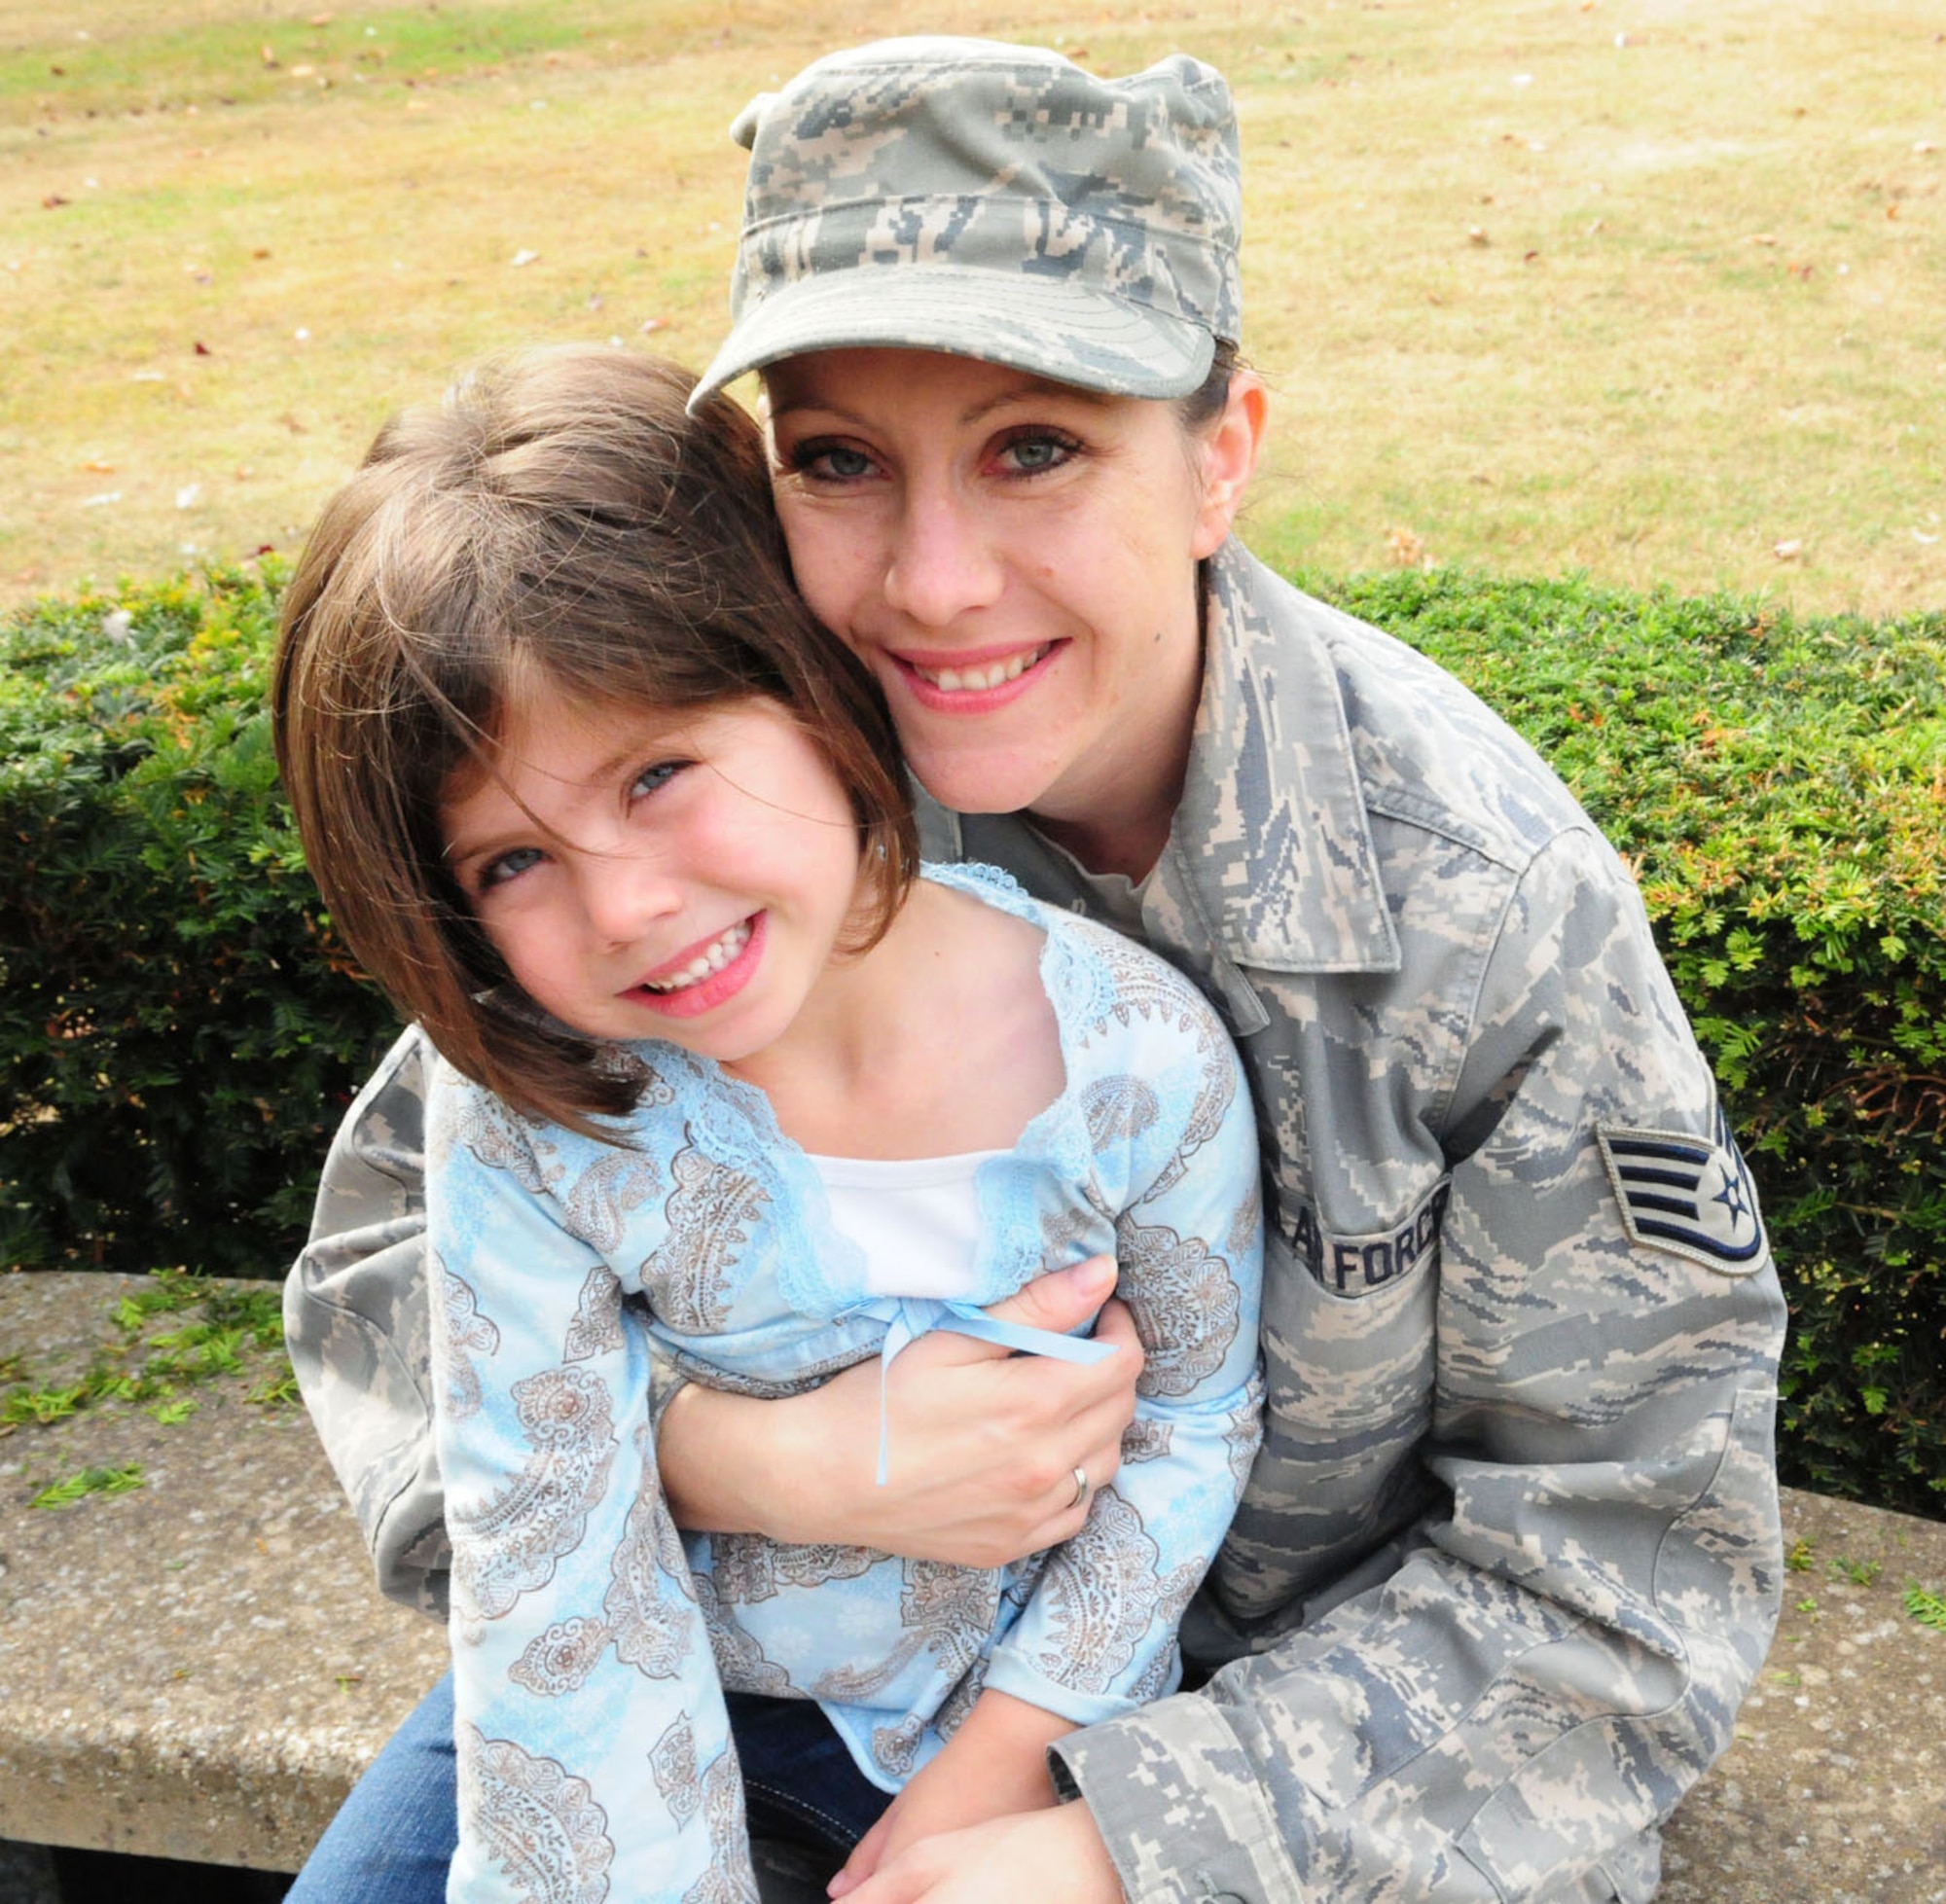 Noel Ingram, 4, poses with her mom, Staff Sgt. Alana Ingram, Defense Media Activity, U.K., NCOIC of broadcast operations, at RAF Feltwell, Oct. 2, 2009. When asked how proud she thought her mom was of her for donating her hair, Noel stretched her 4-year-old arms as wide apart as she could, and said 'This much." On the other hand, to demonstrate how proud she actually was of her daughter for doing this, Sergeant Ingram stretched out her adult-sized arms far further, and said, "No - this much!" (U.S. Air Force photo by Karen Abeyasekere)